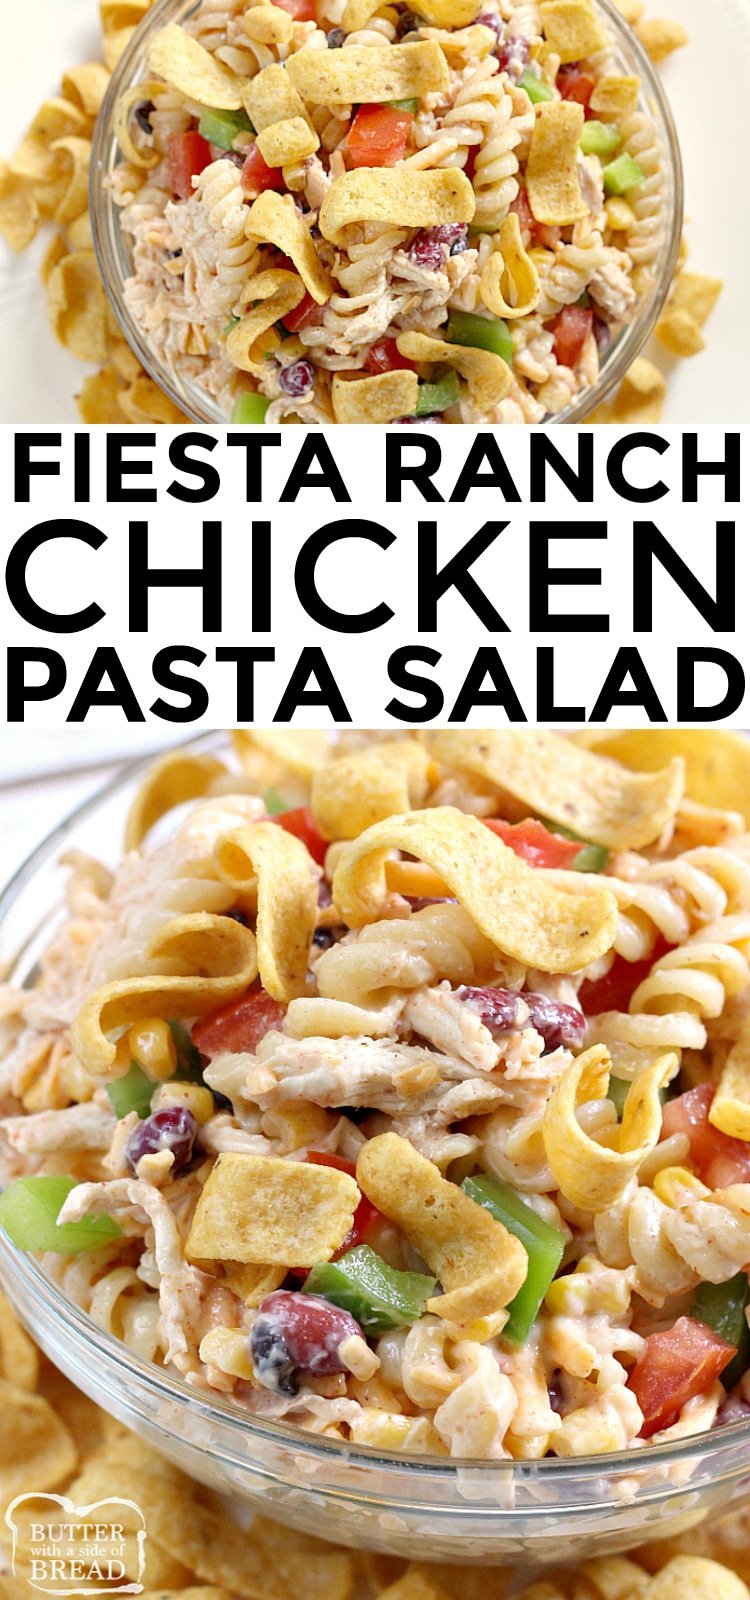 My family's favorite summer meal!!! Fiesta Ranch Chicken Pasta Salad is full of fresh southwestern flavors with black beans, corn, cheese and tomatoes. This hearty chicken pasta salad recipe topped with Fritos is perfect as a main dish or a side dish for potlucks and parties!